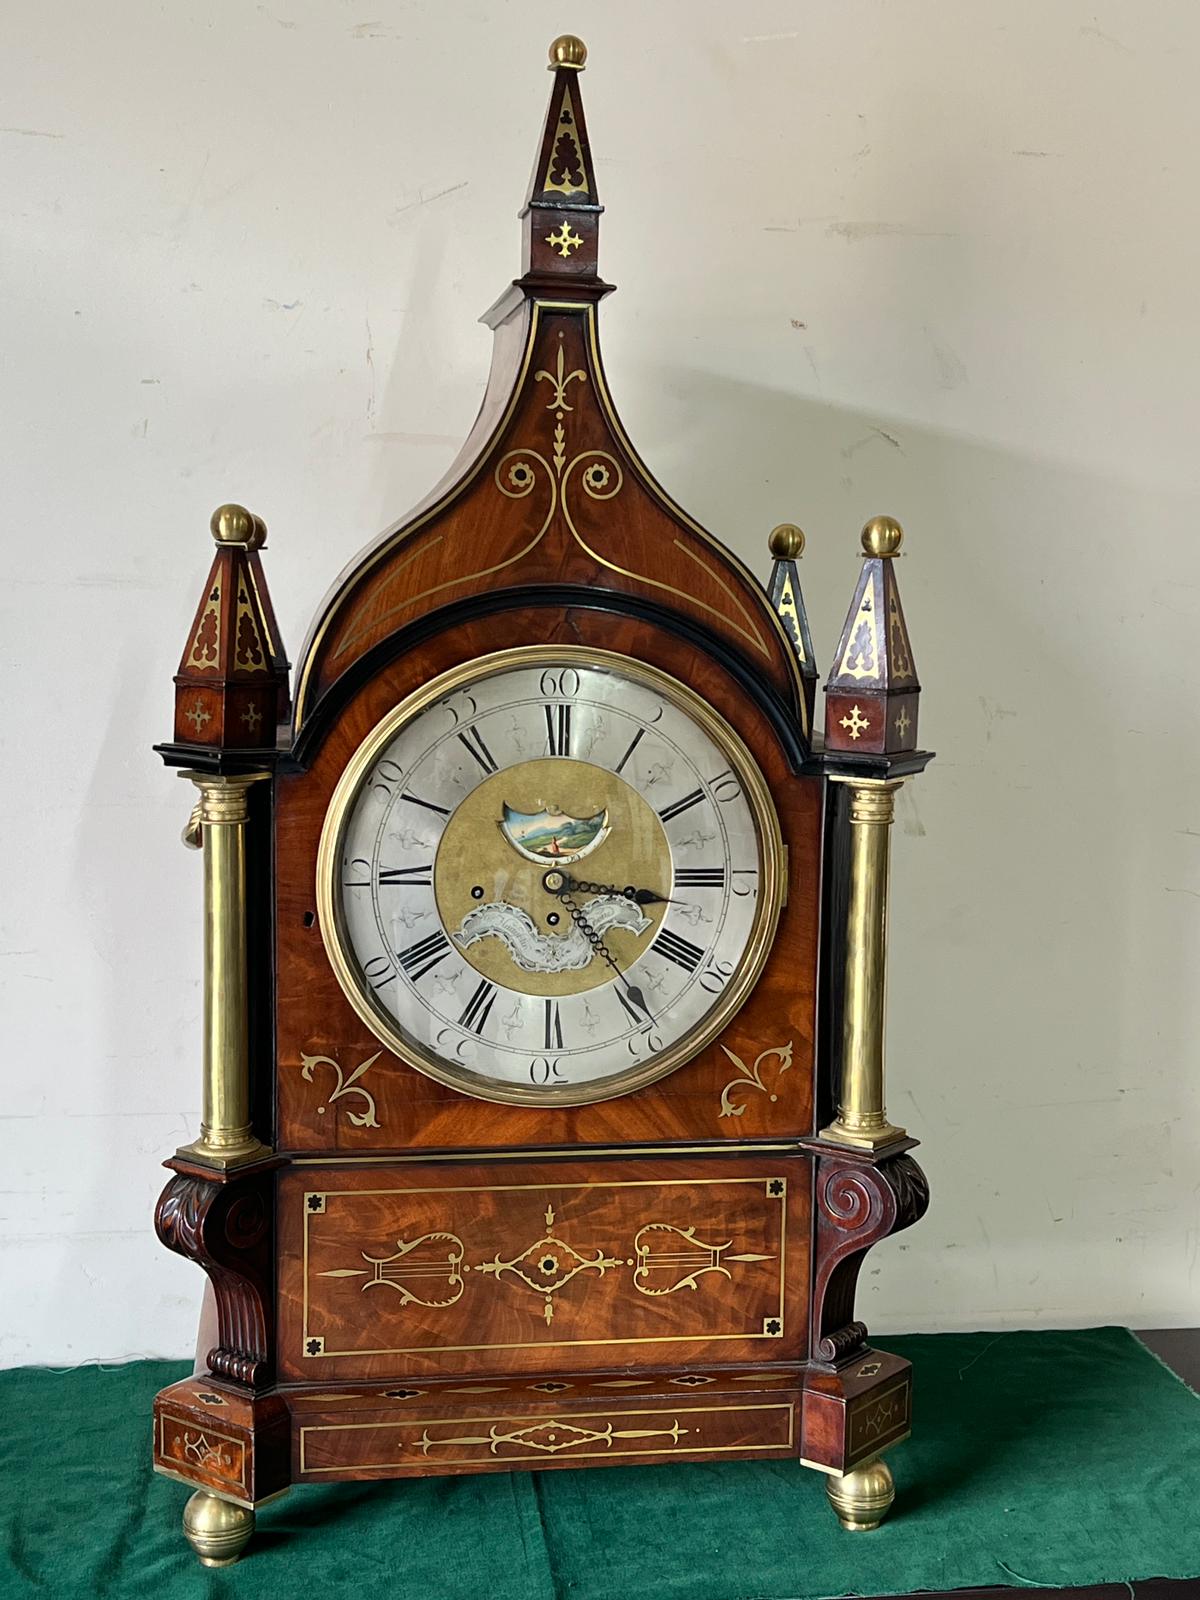 A William IV mahogany Gothic style bracket clock by Richard Haughtin Of London - (18th century and